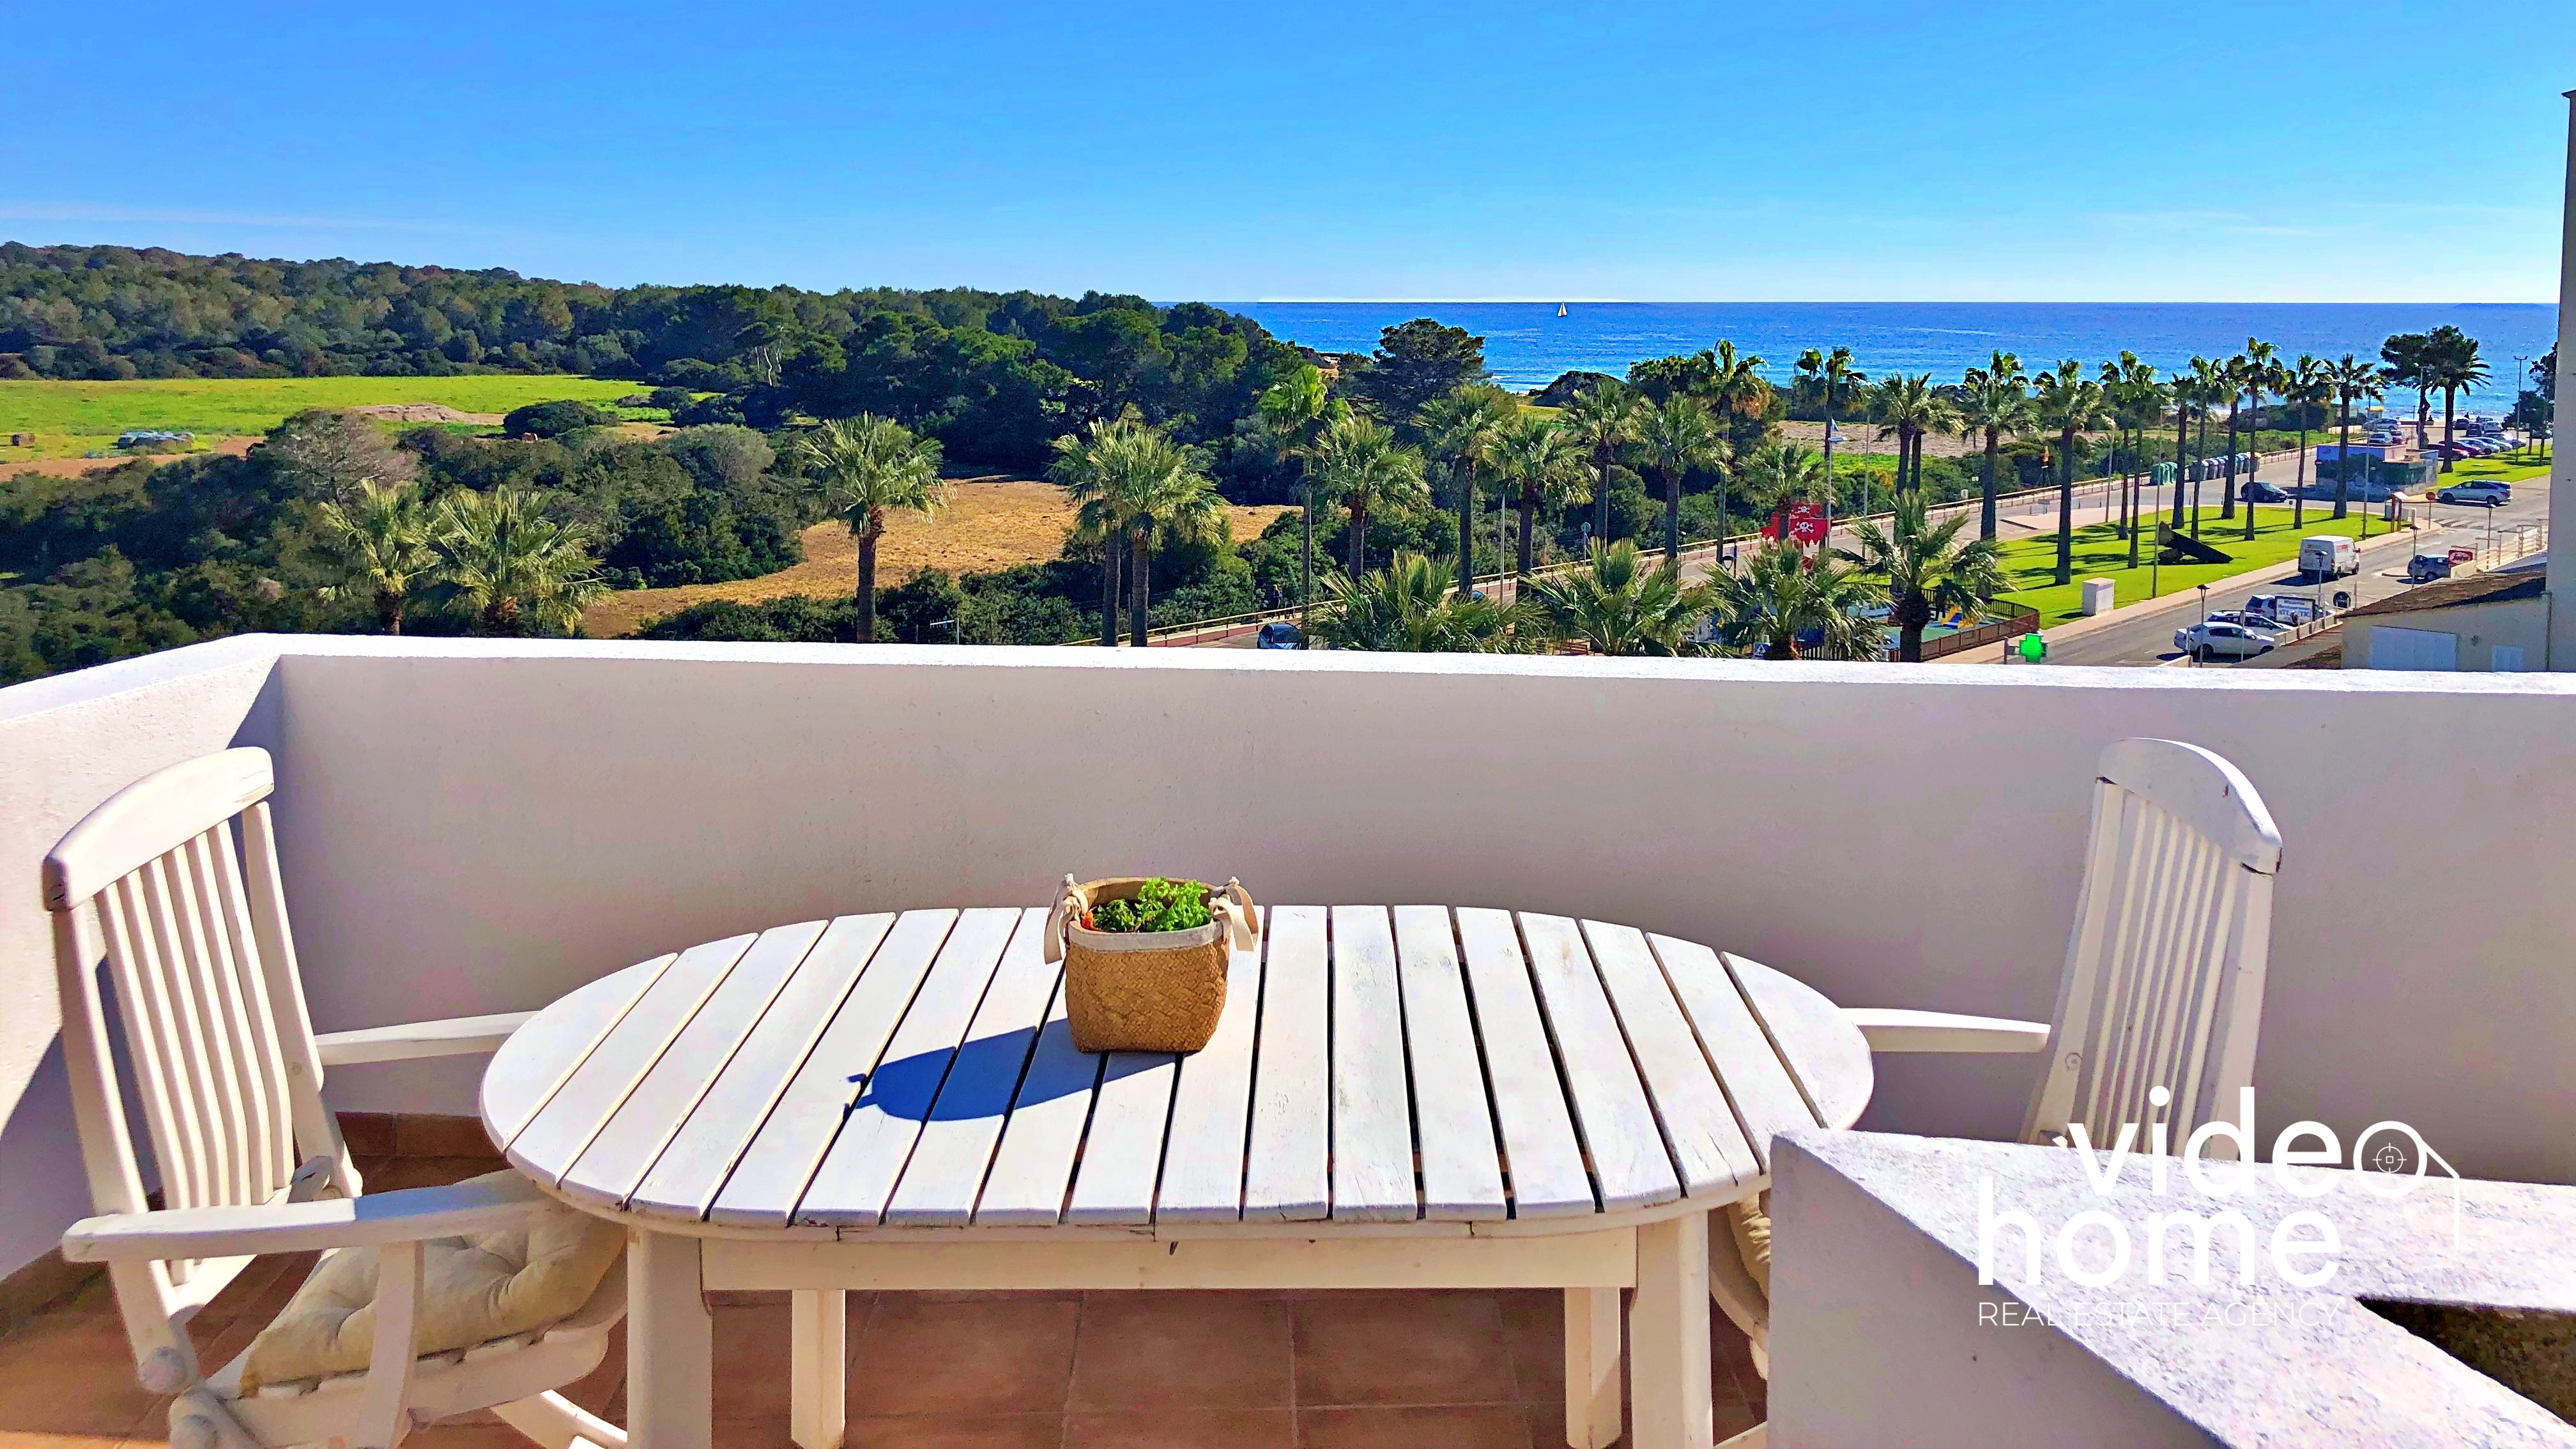 Apartment with spectacular views of the beach and the nature reserve in Sa Coma.